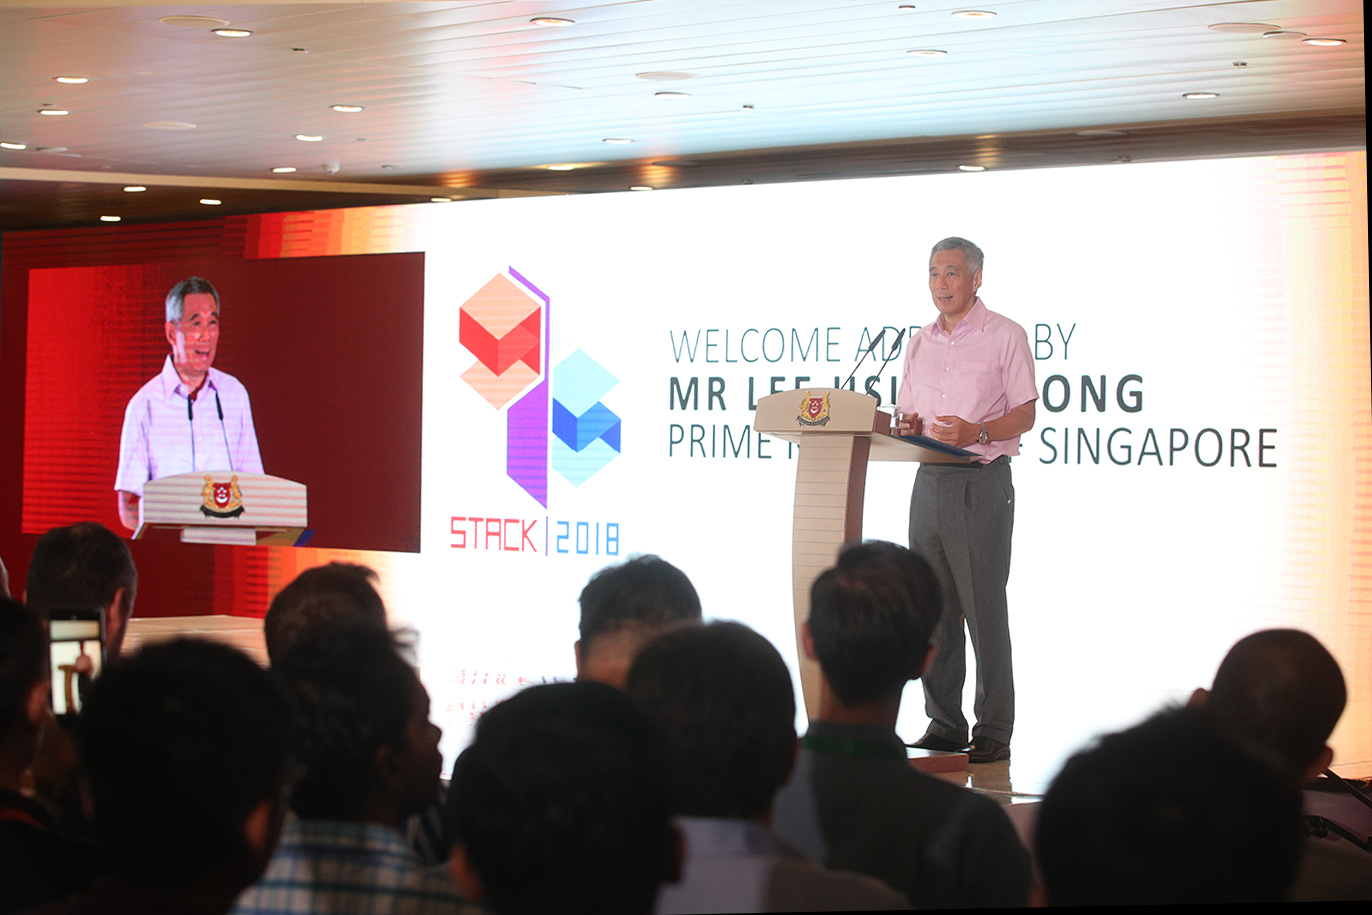 PM Lee Hsien Loong at GovTech STACK 2018 Developer Conference on 2 Oct 2018 (MCI Photo by Chwee)